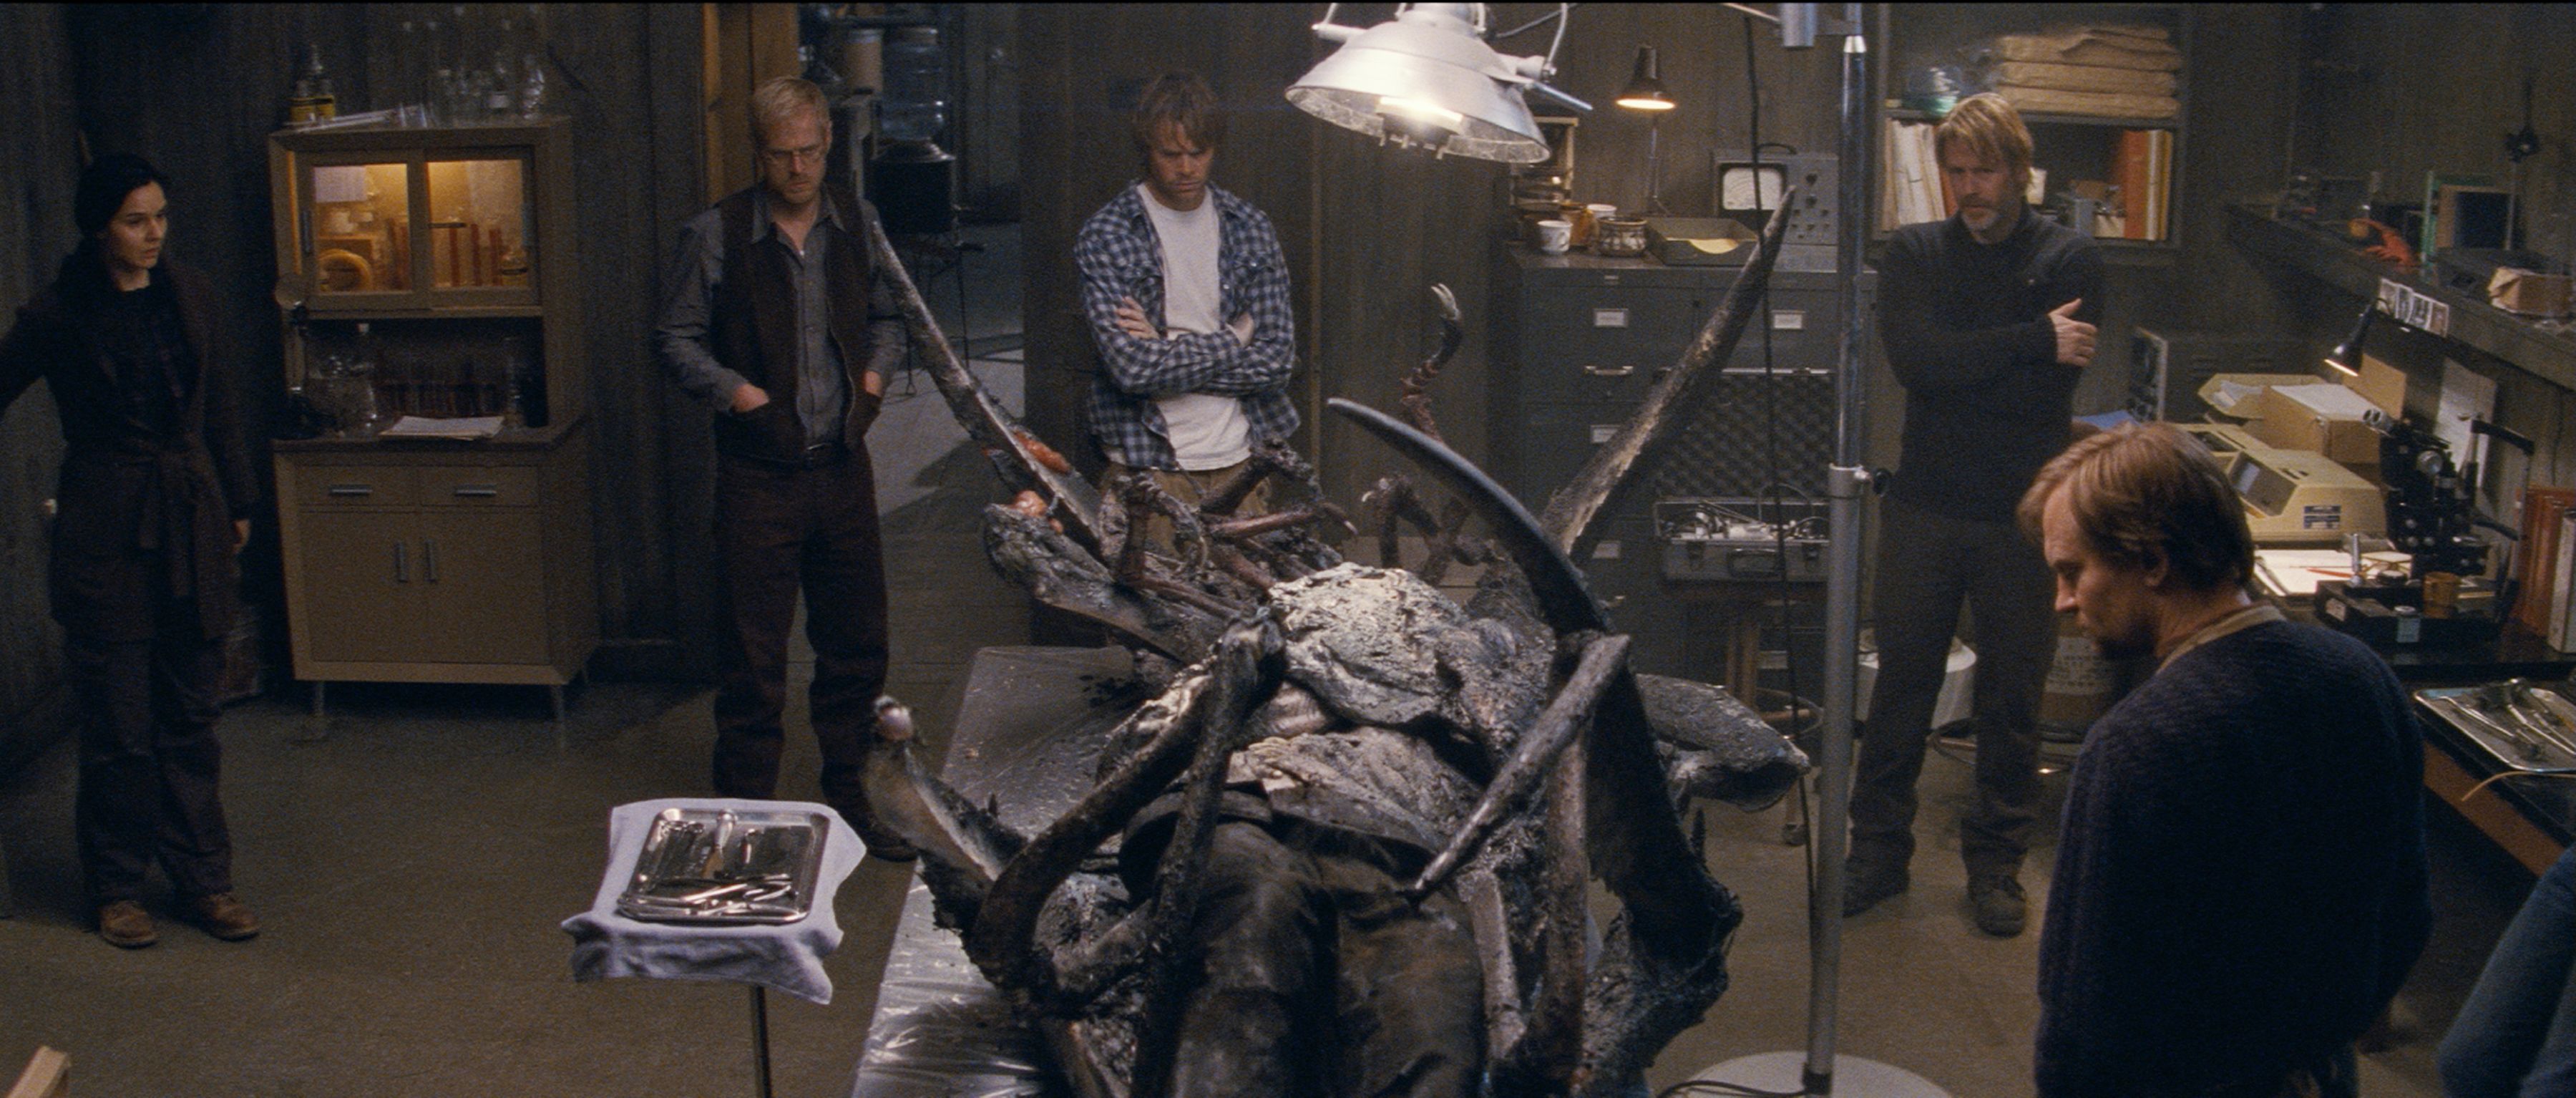 The Thing Photo #8